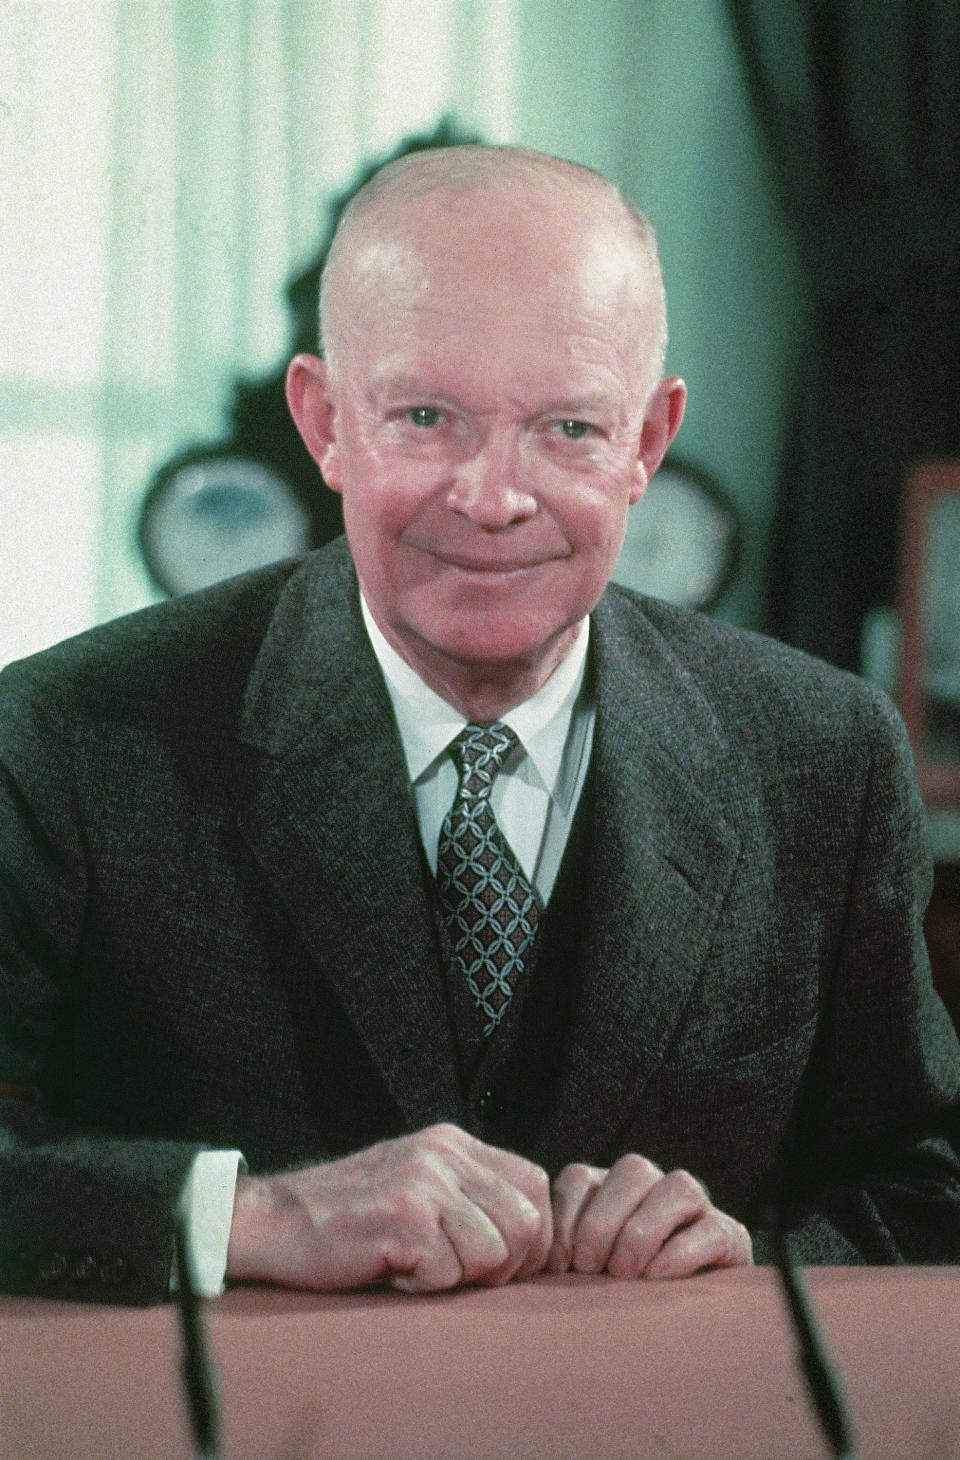 President Dwight Eisenhower in 1956, in the White House, in Washington, D.C.